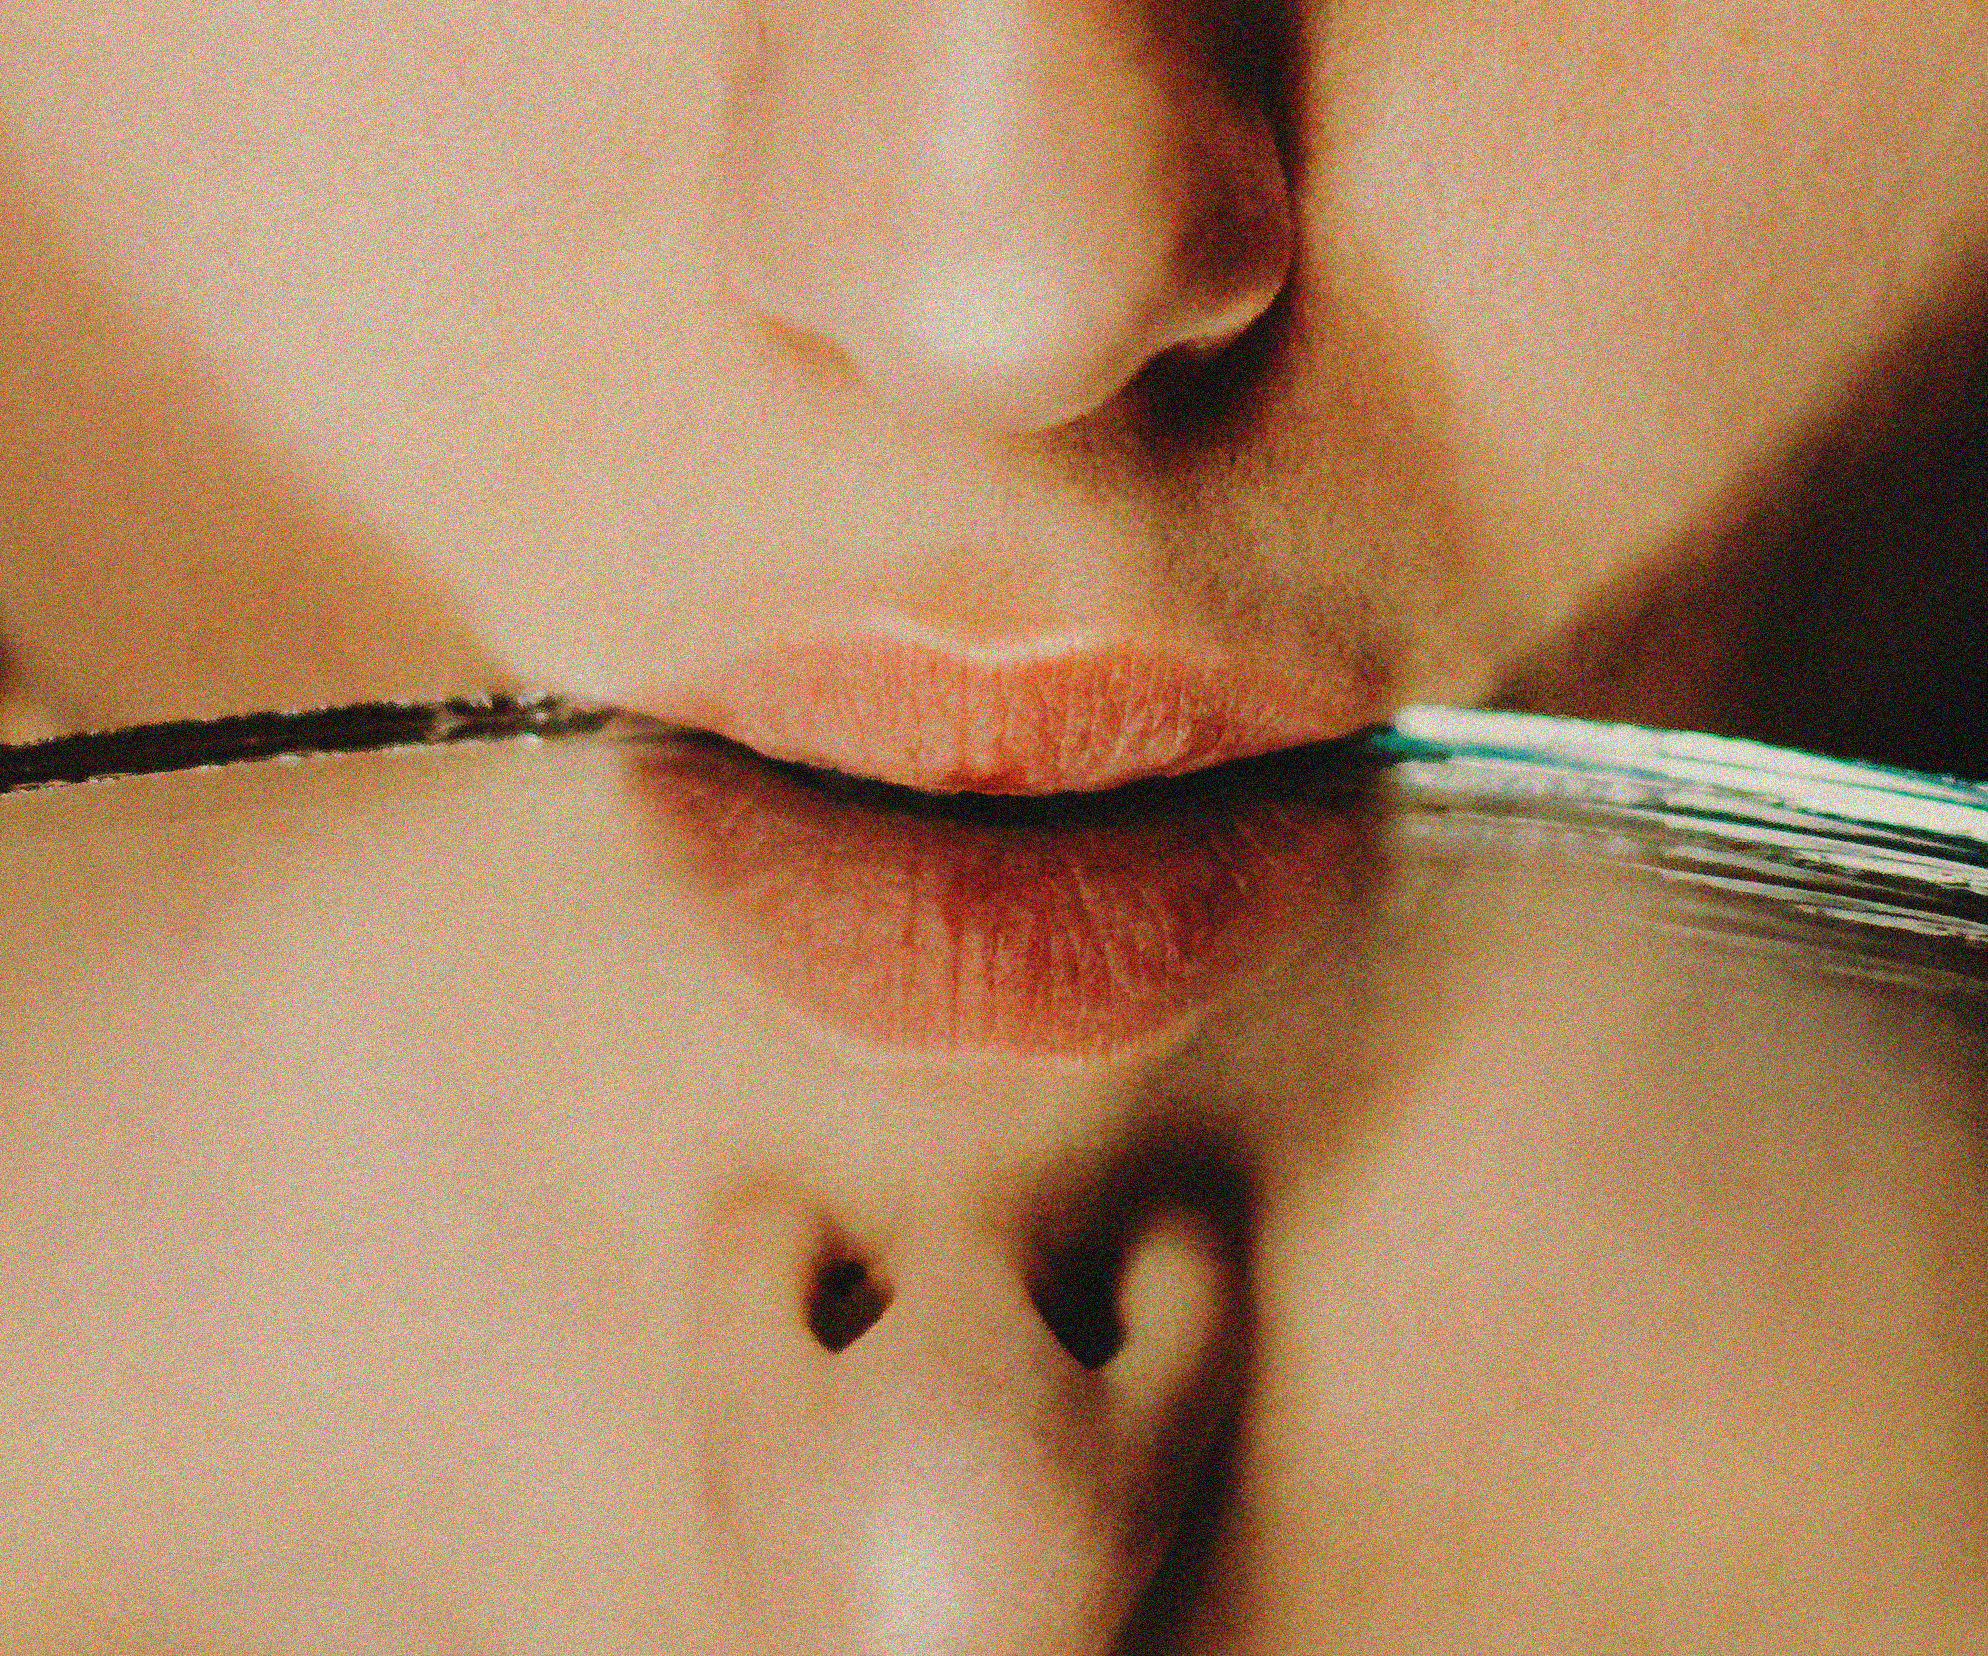 one person, close-up, indoors, beautiful woman, human body part, young women, young adult, human lips, day, people